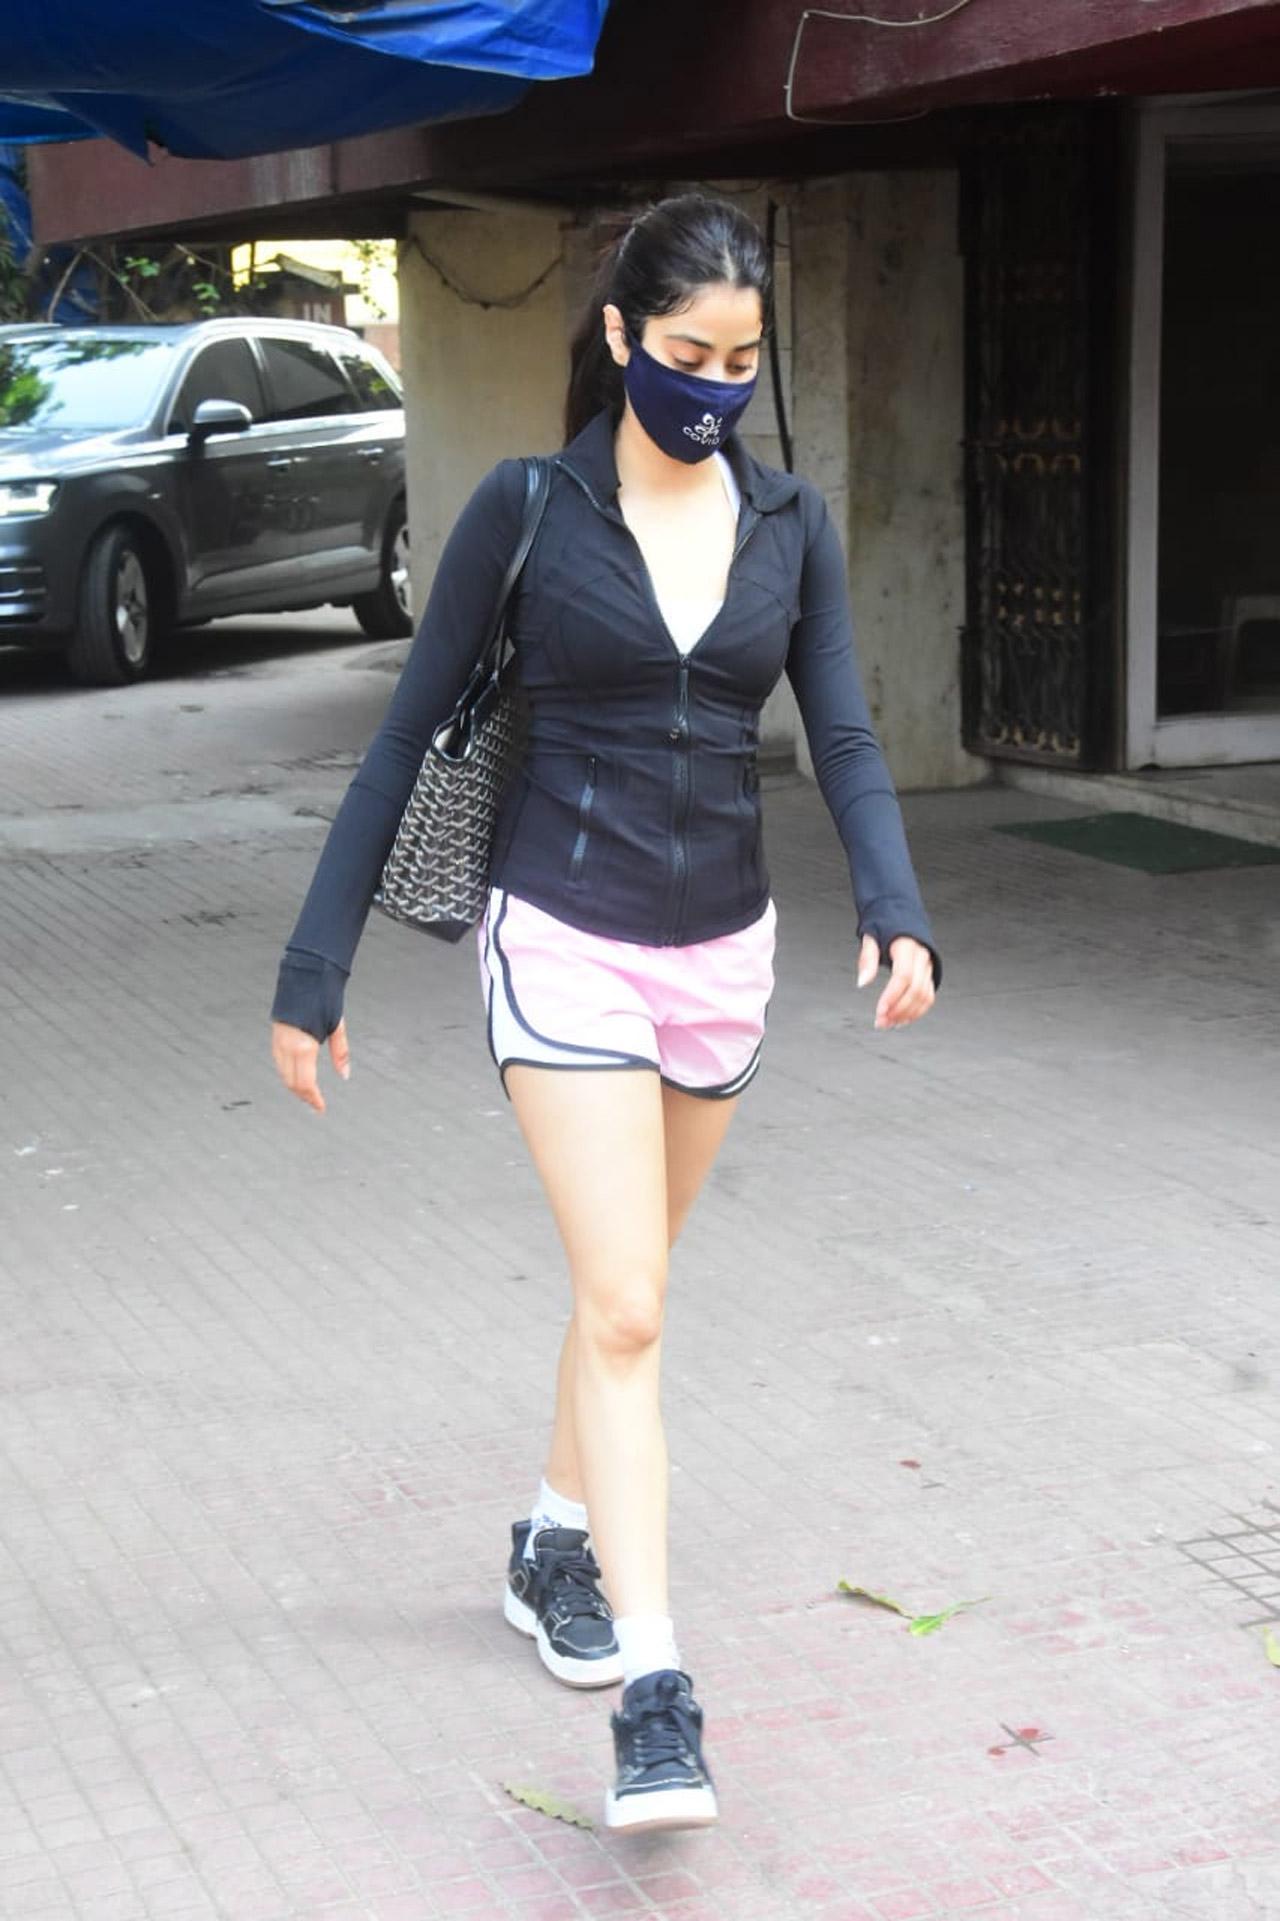 Janhvi Kapoor was clicked outside her gym in Bandra, Mumbai. The actress, who is a regular at the gym, is all geared up for her next film Roohi, co-starring Rajkummar Rao and Varun Sharma.